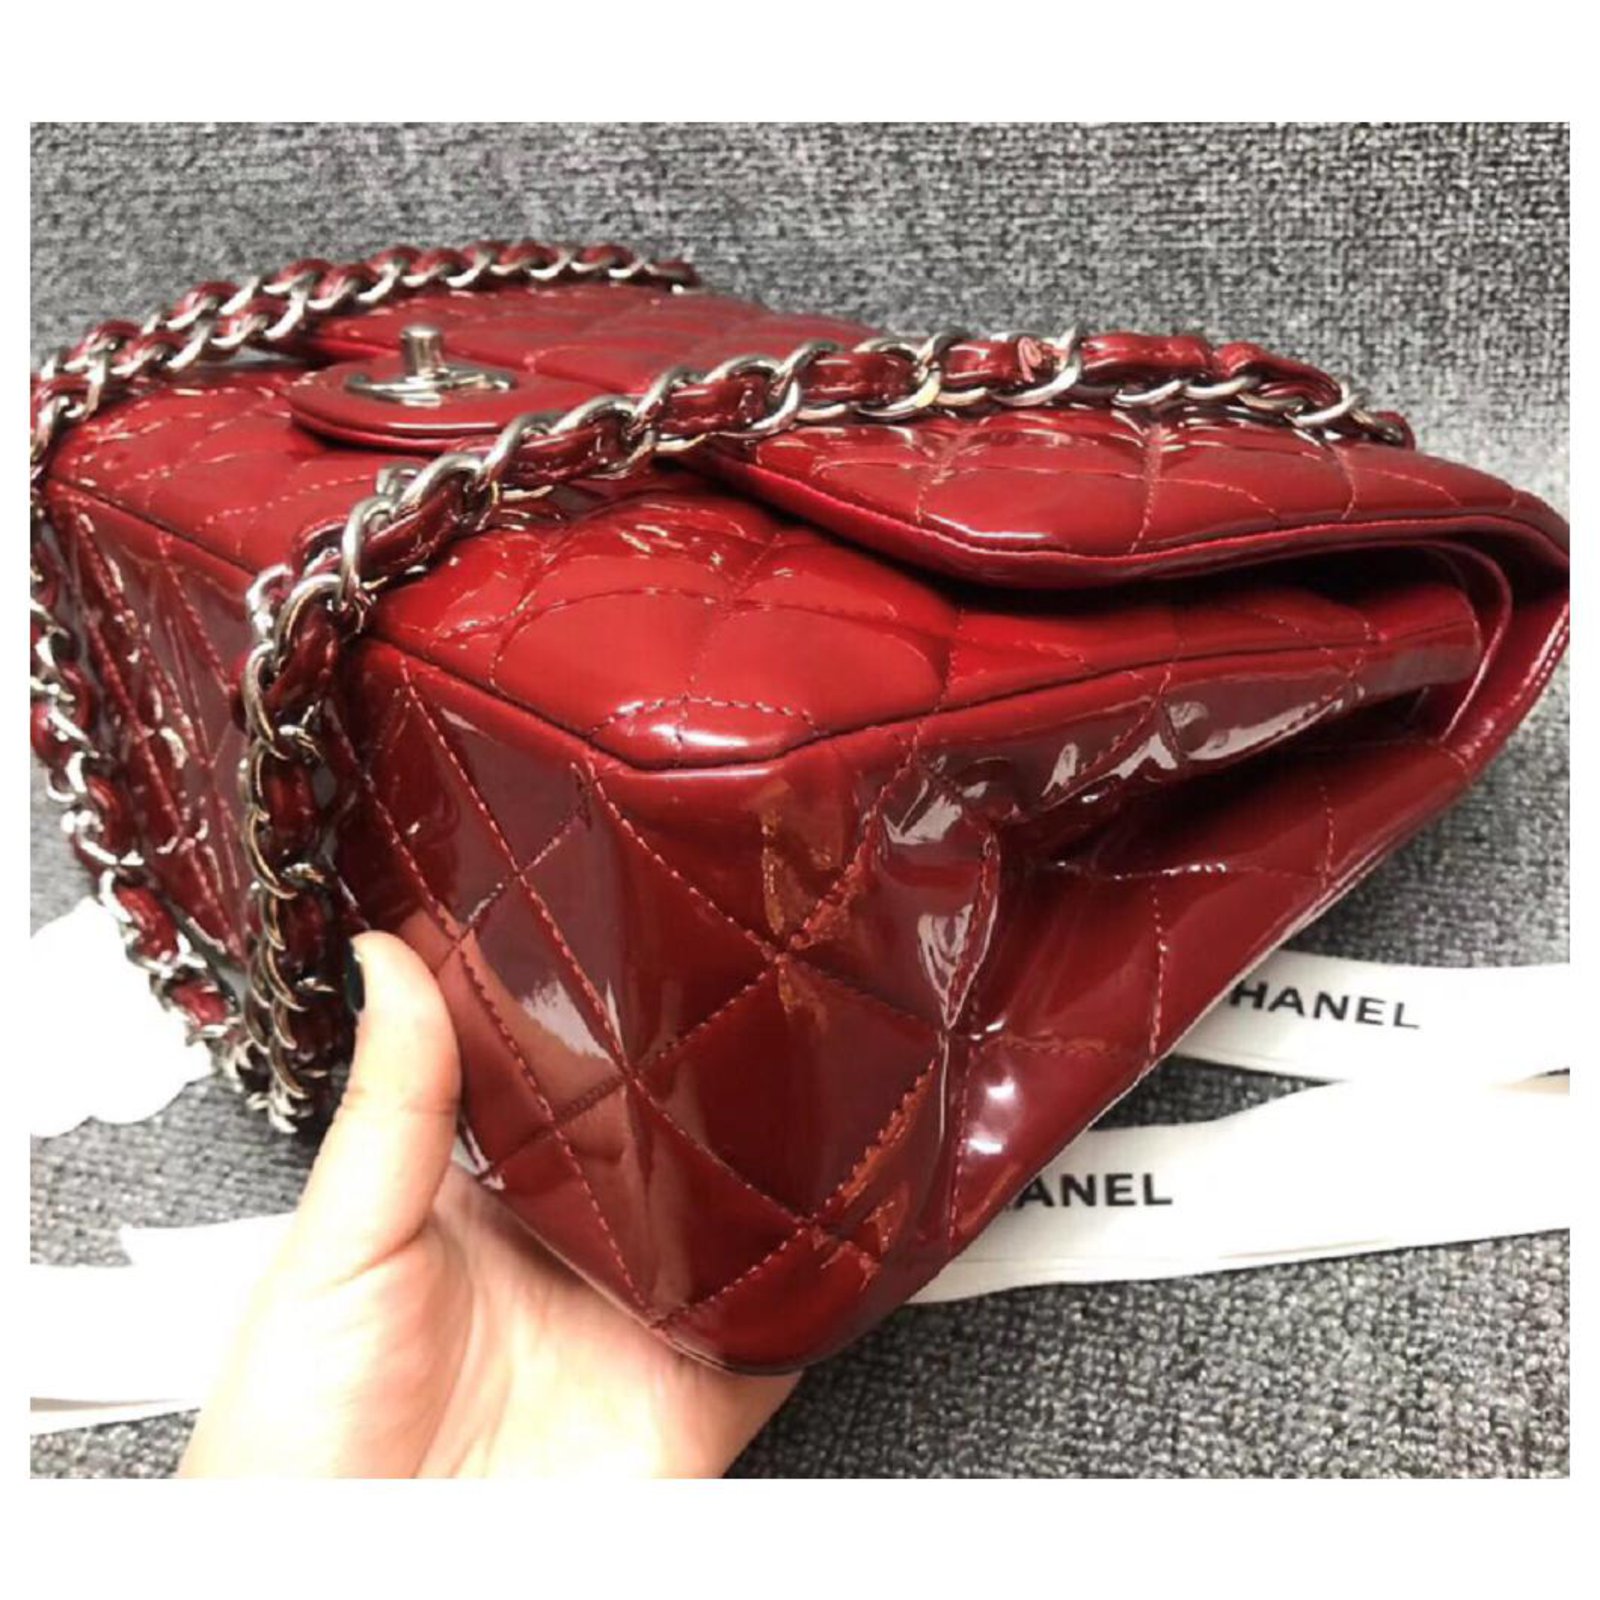 classic red chanel bag vintage